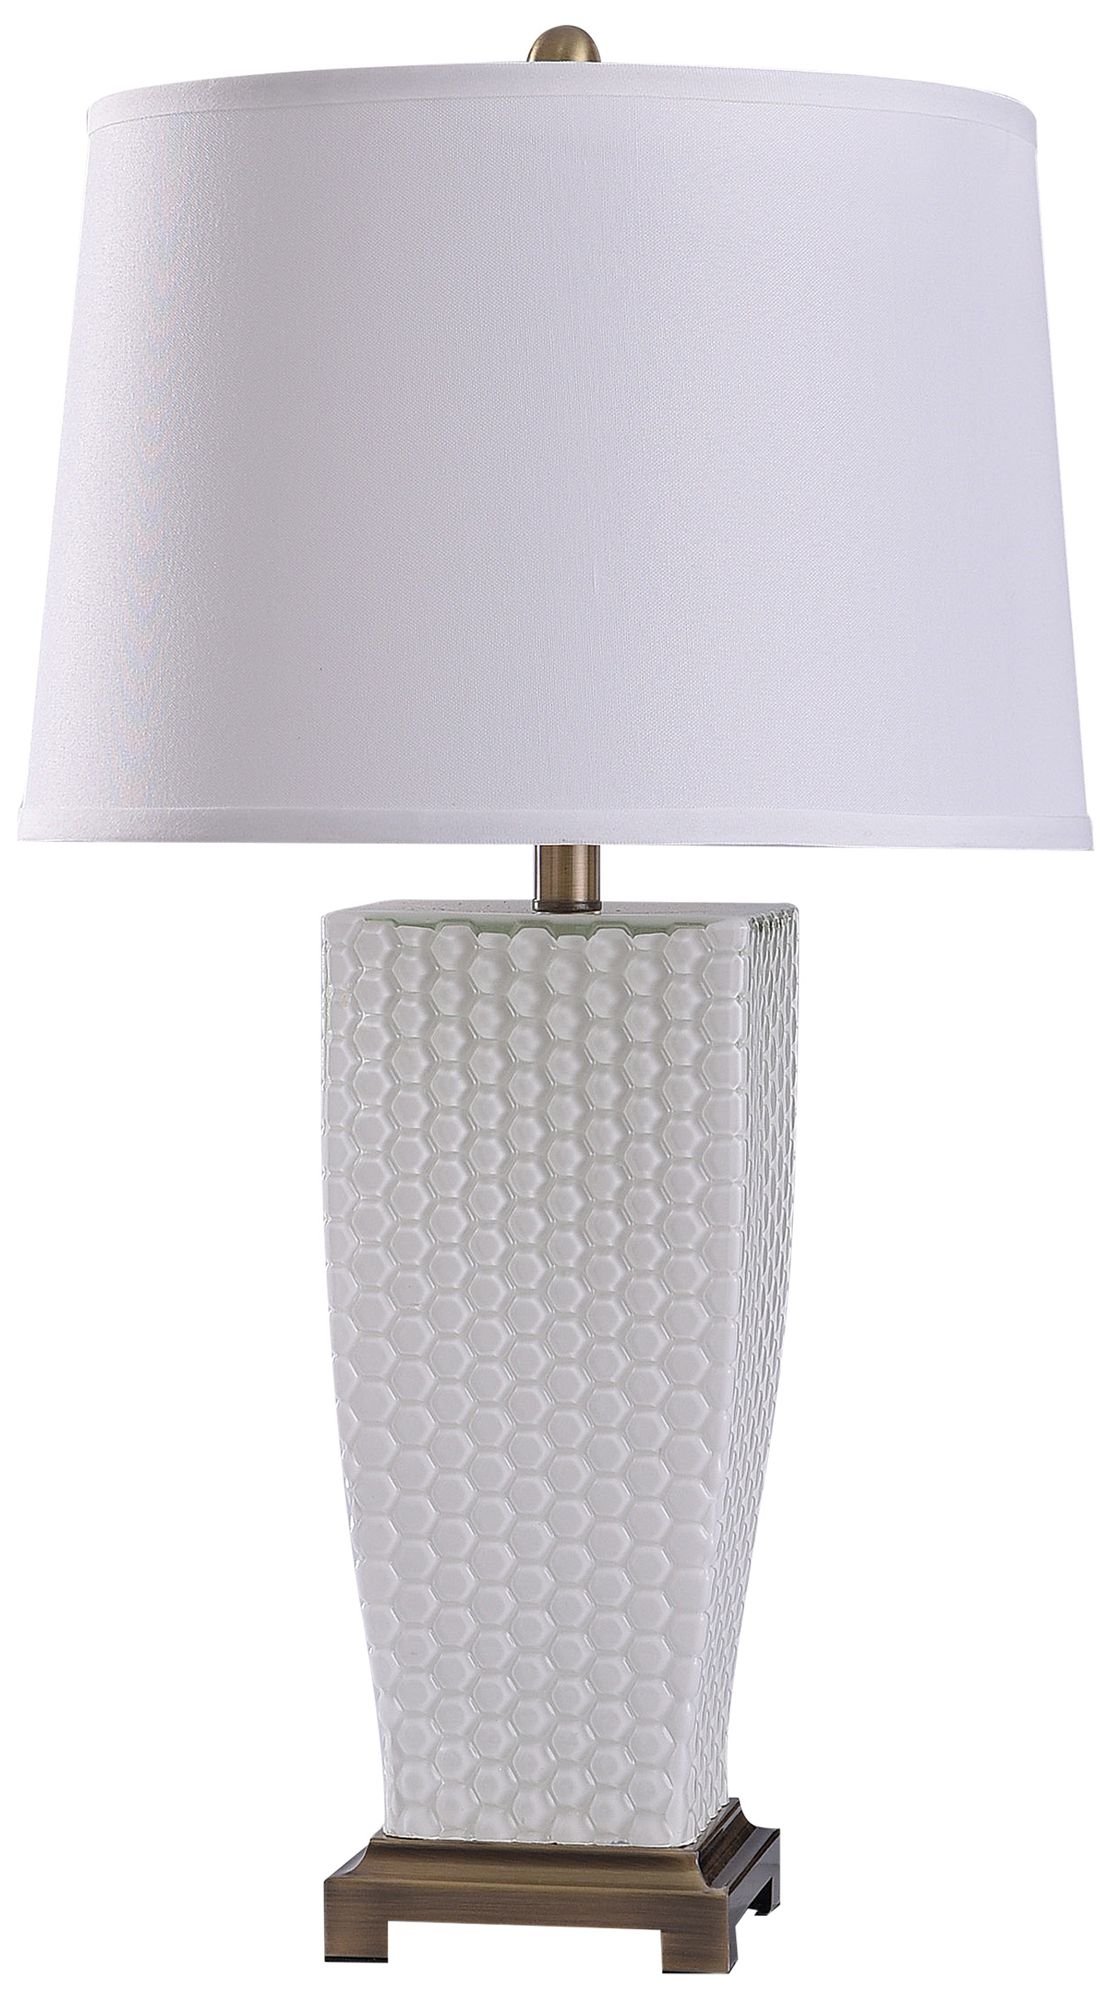 Duerstock Dimpled Glass Table Lamp - Brass - White Shade